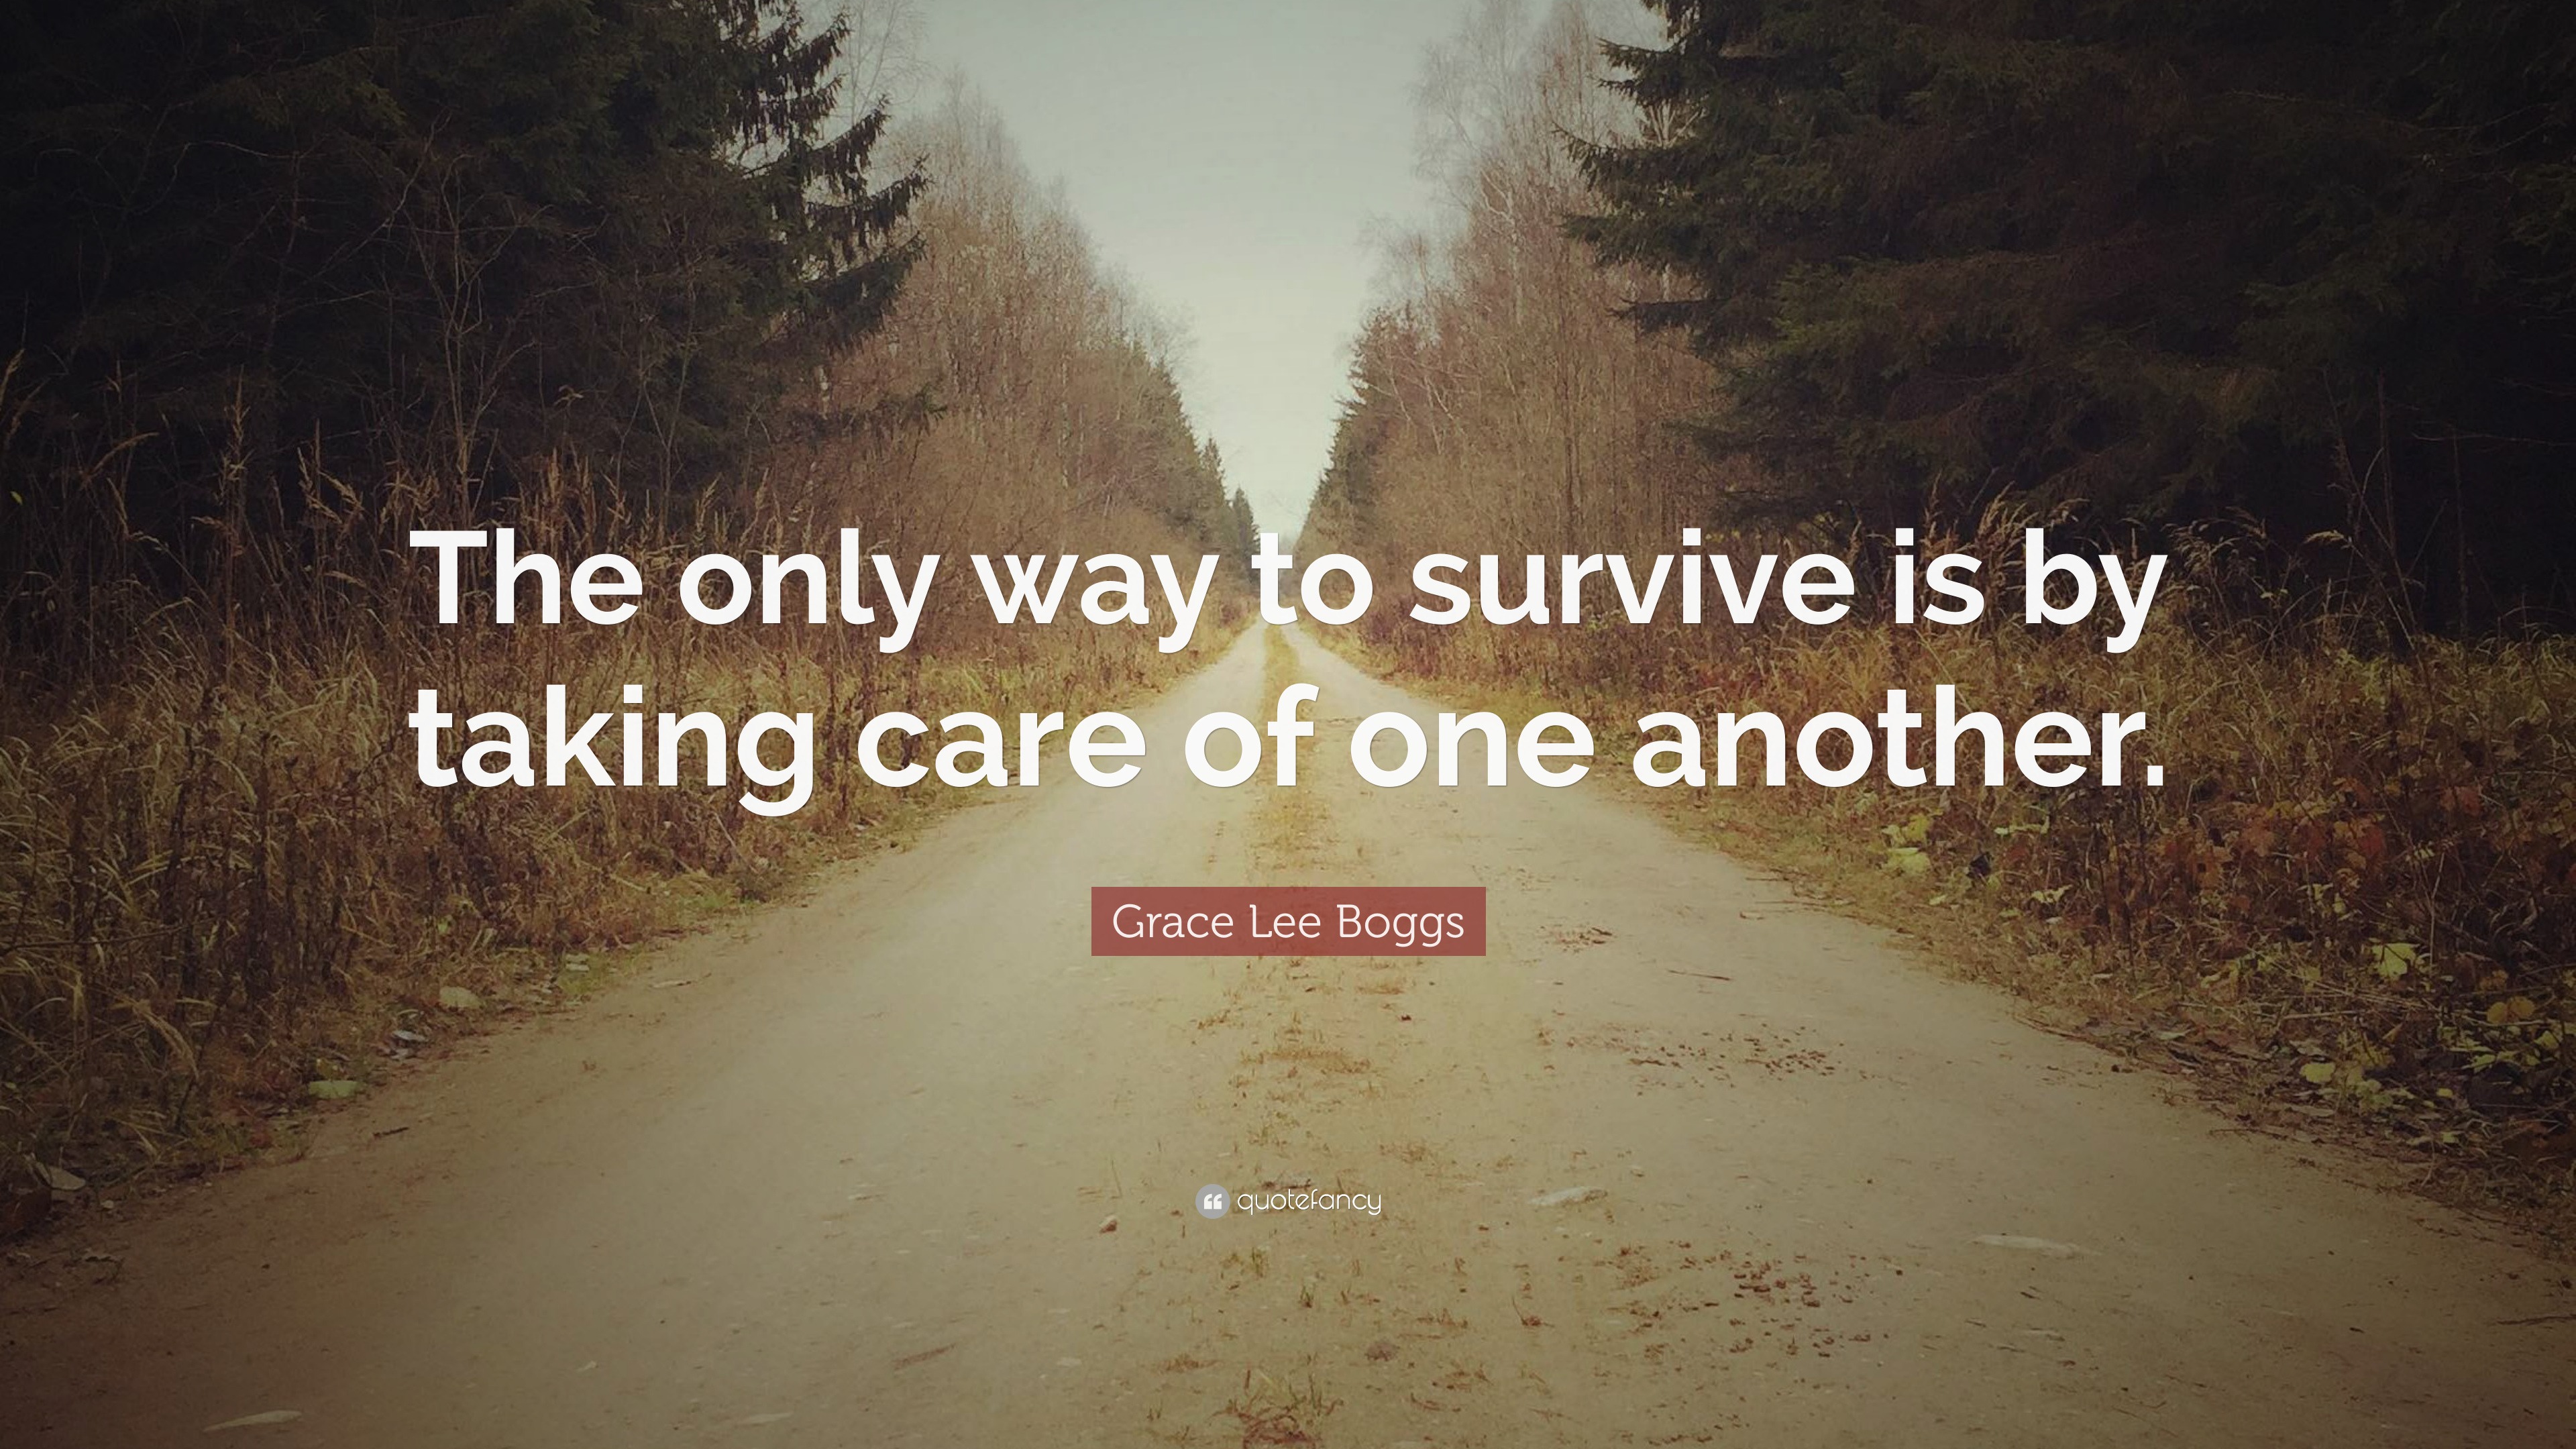 Grace Lee Boggs Quote: “The only way to survive is by taking care of